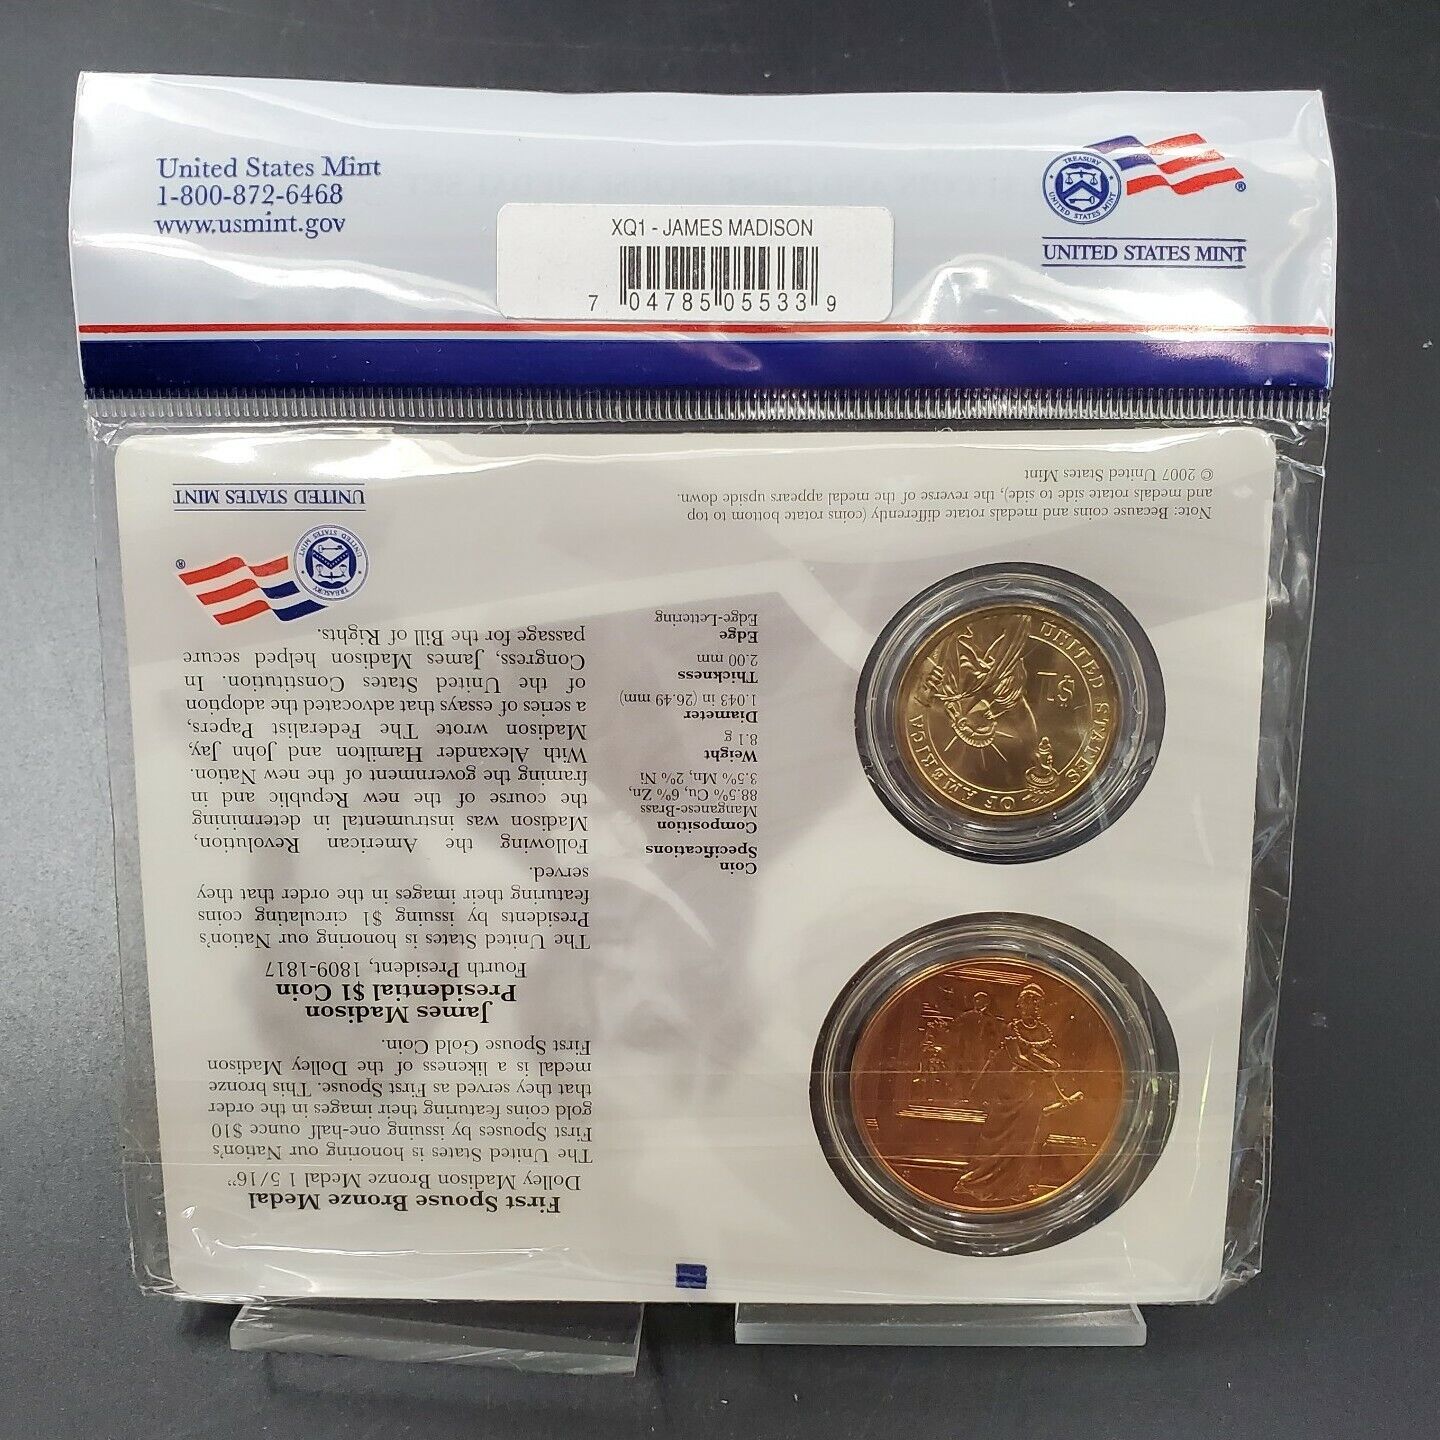 JAMES MADISON & DOLLEY First Spouse $1 Presidential Coin & Medal Set BU OGP